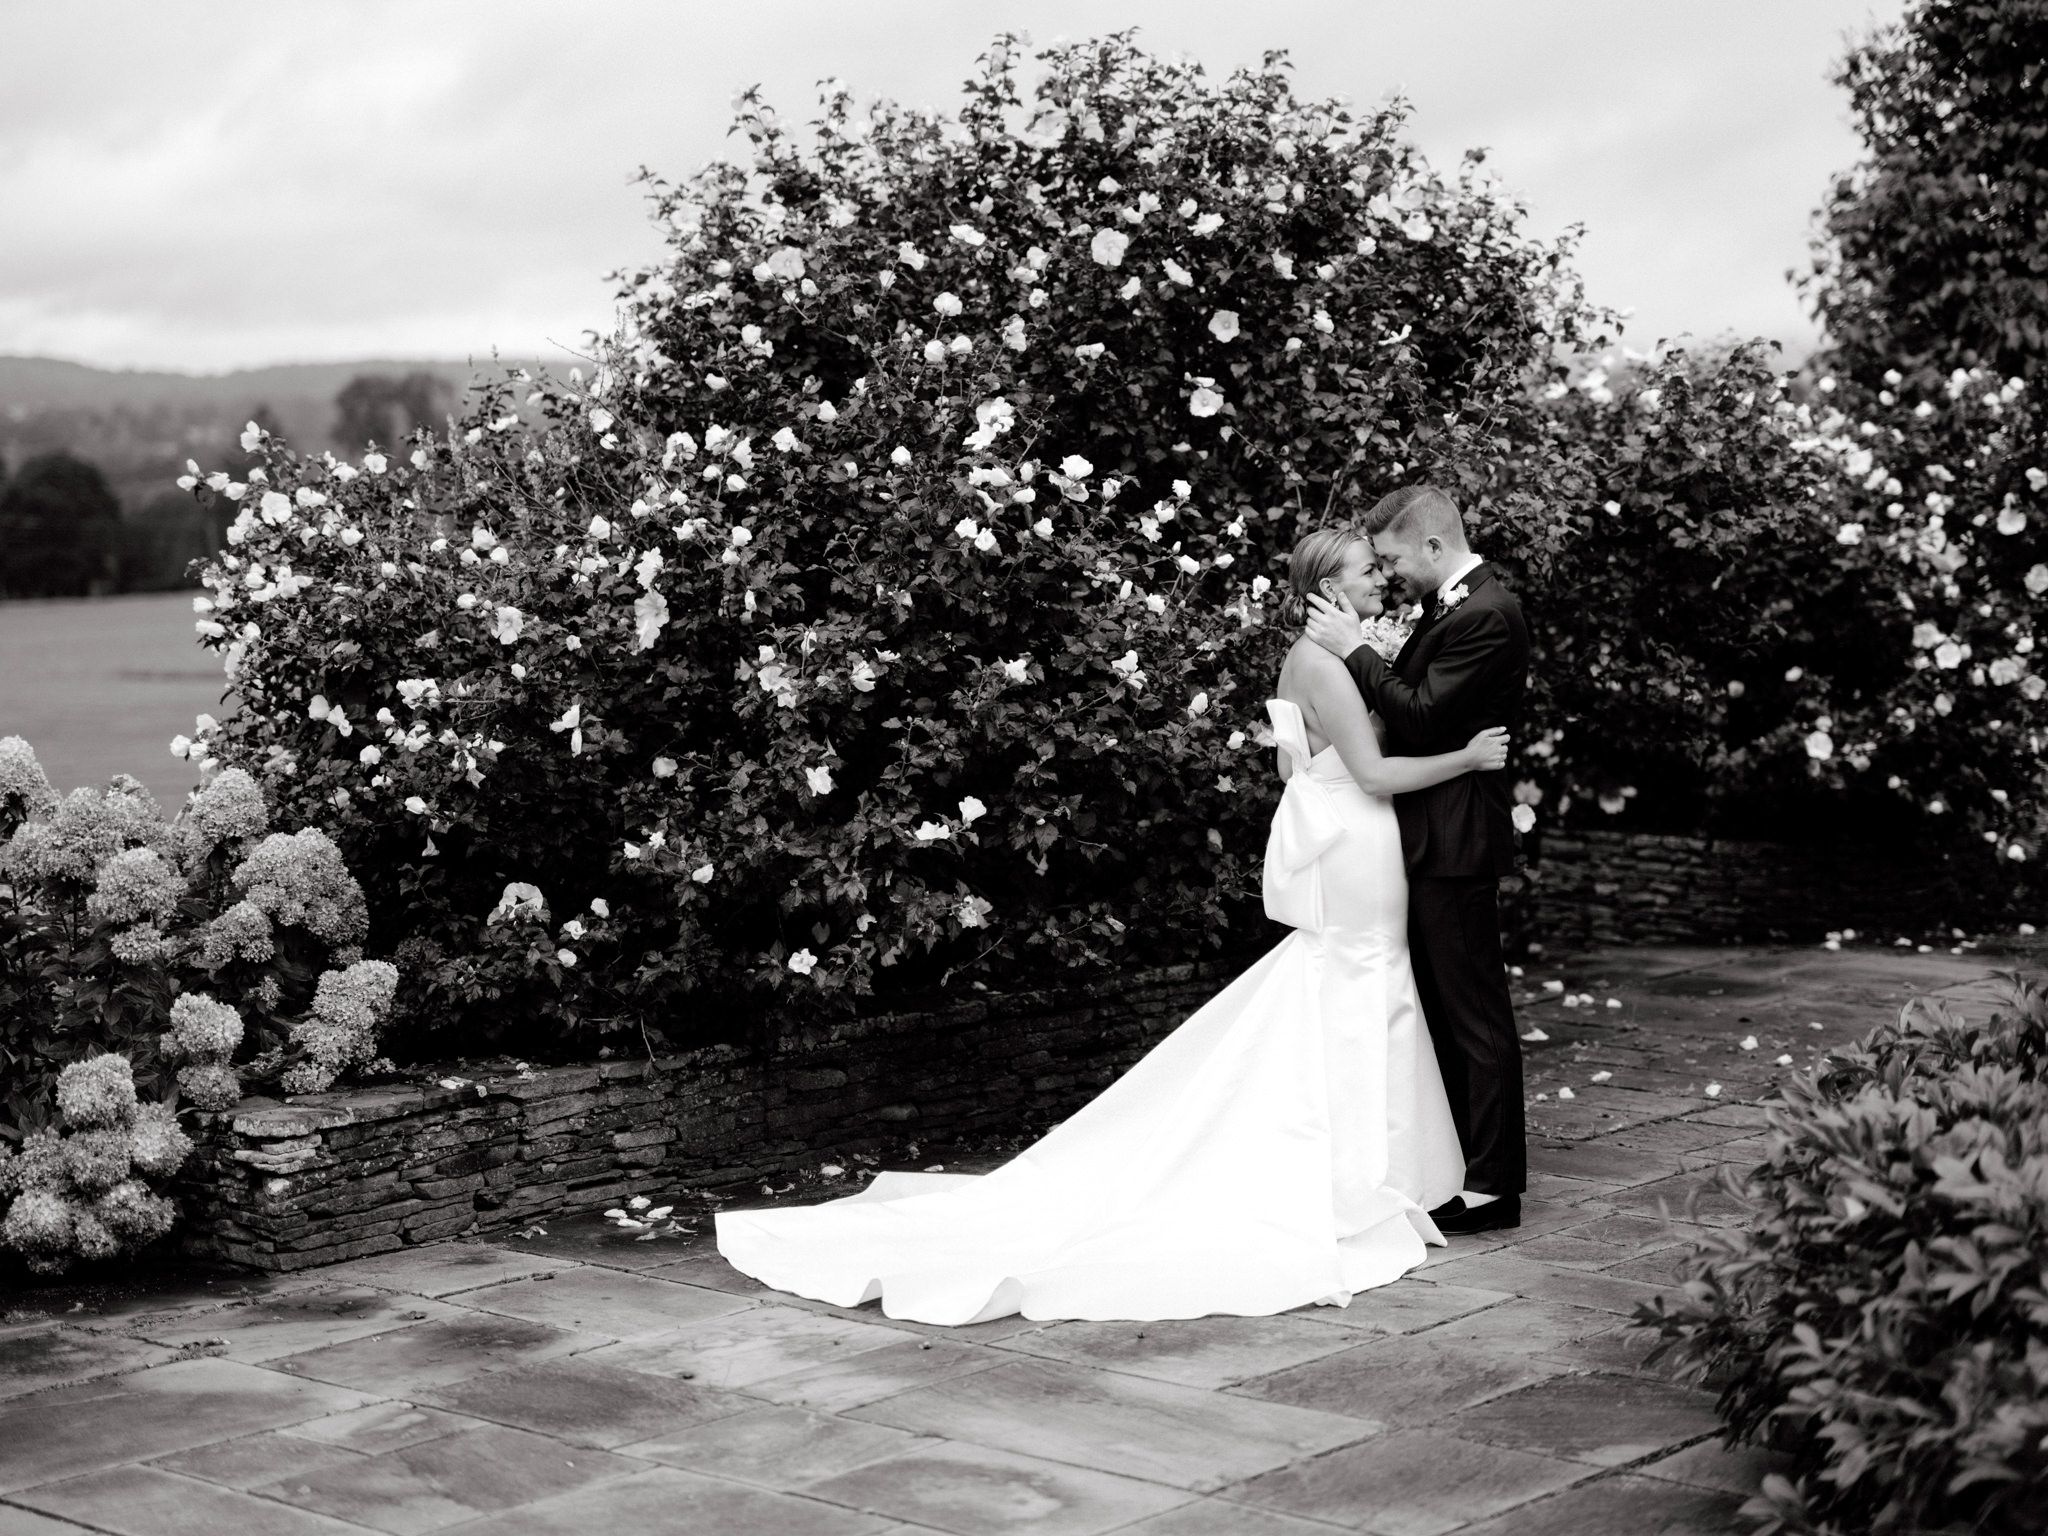 Black and White photo of the bride and groom standing romantically close together amidst many flowers. Destination image by Jenny Fu Studio